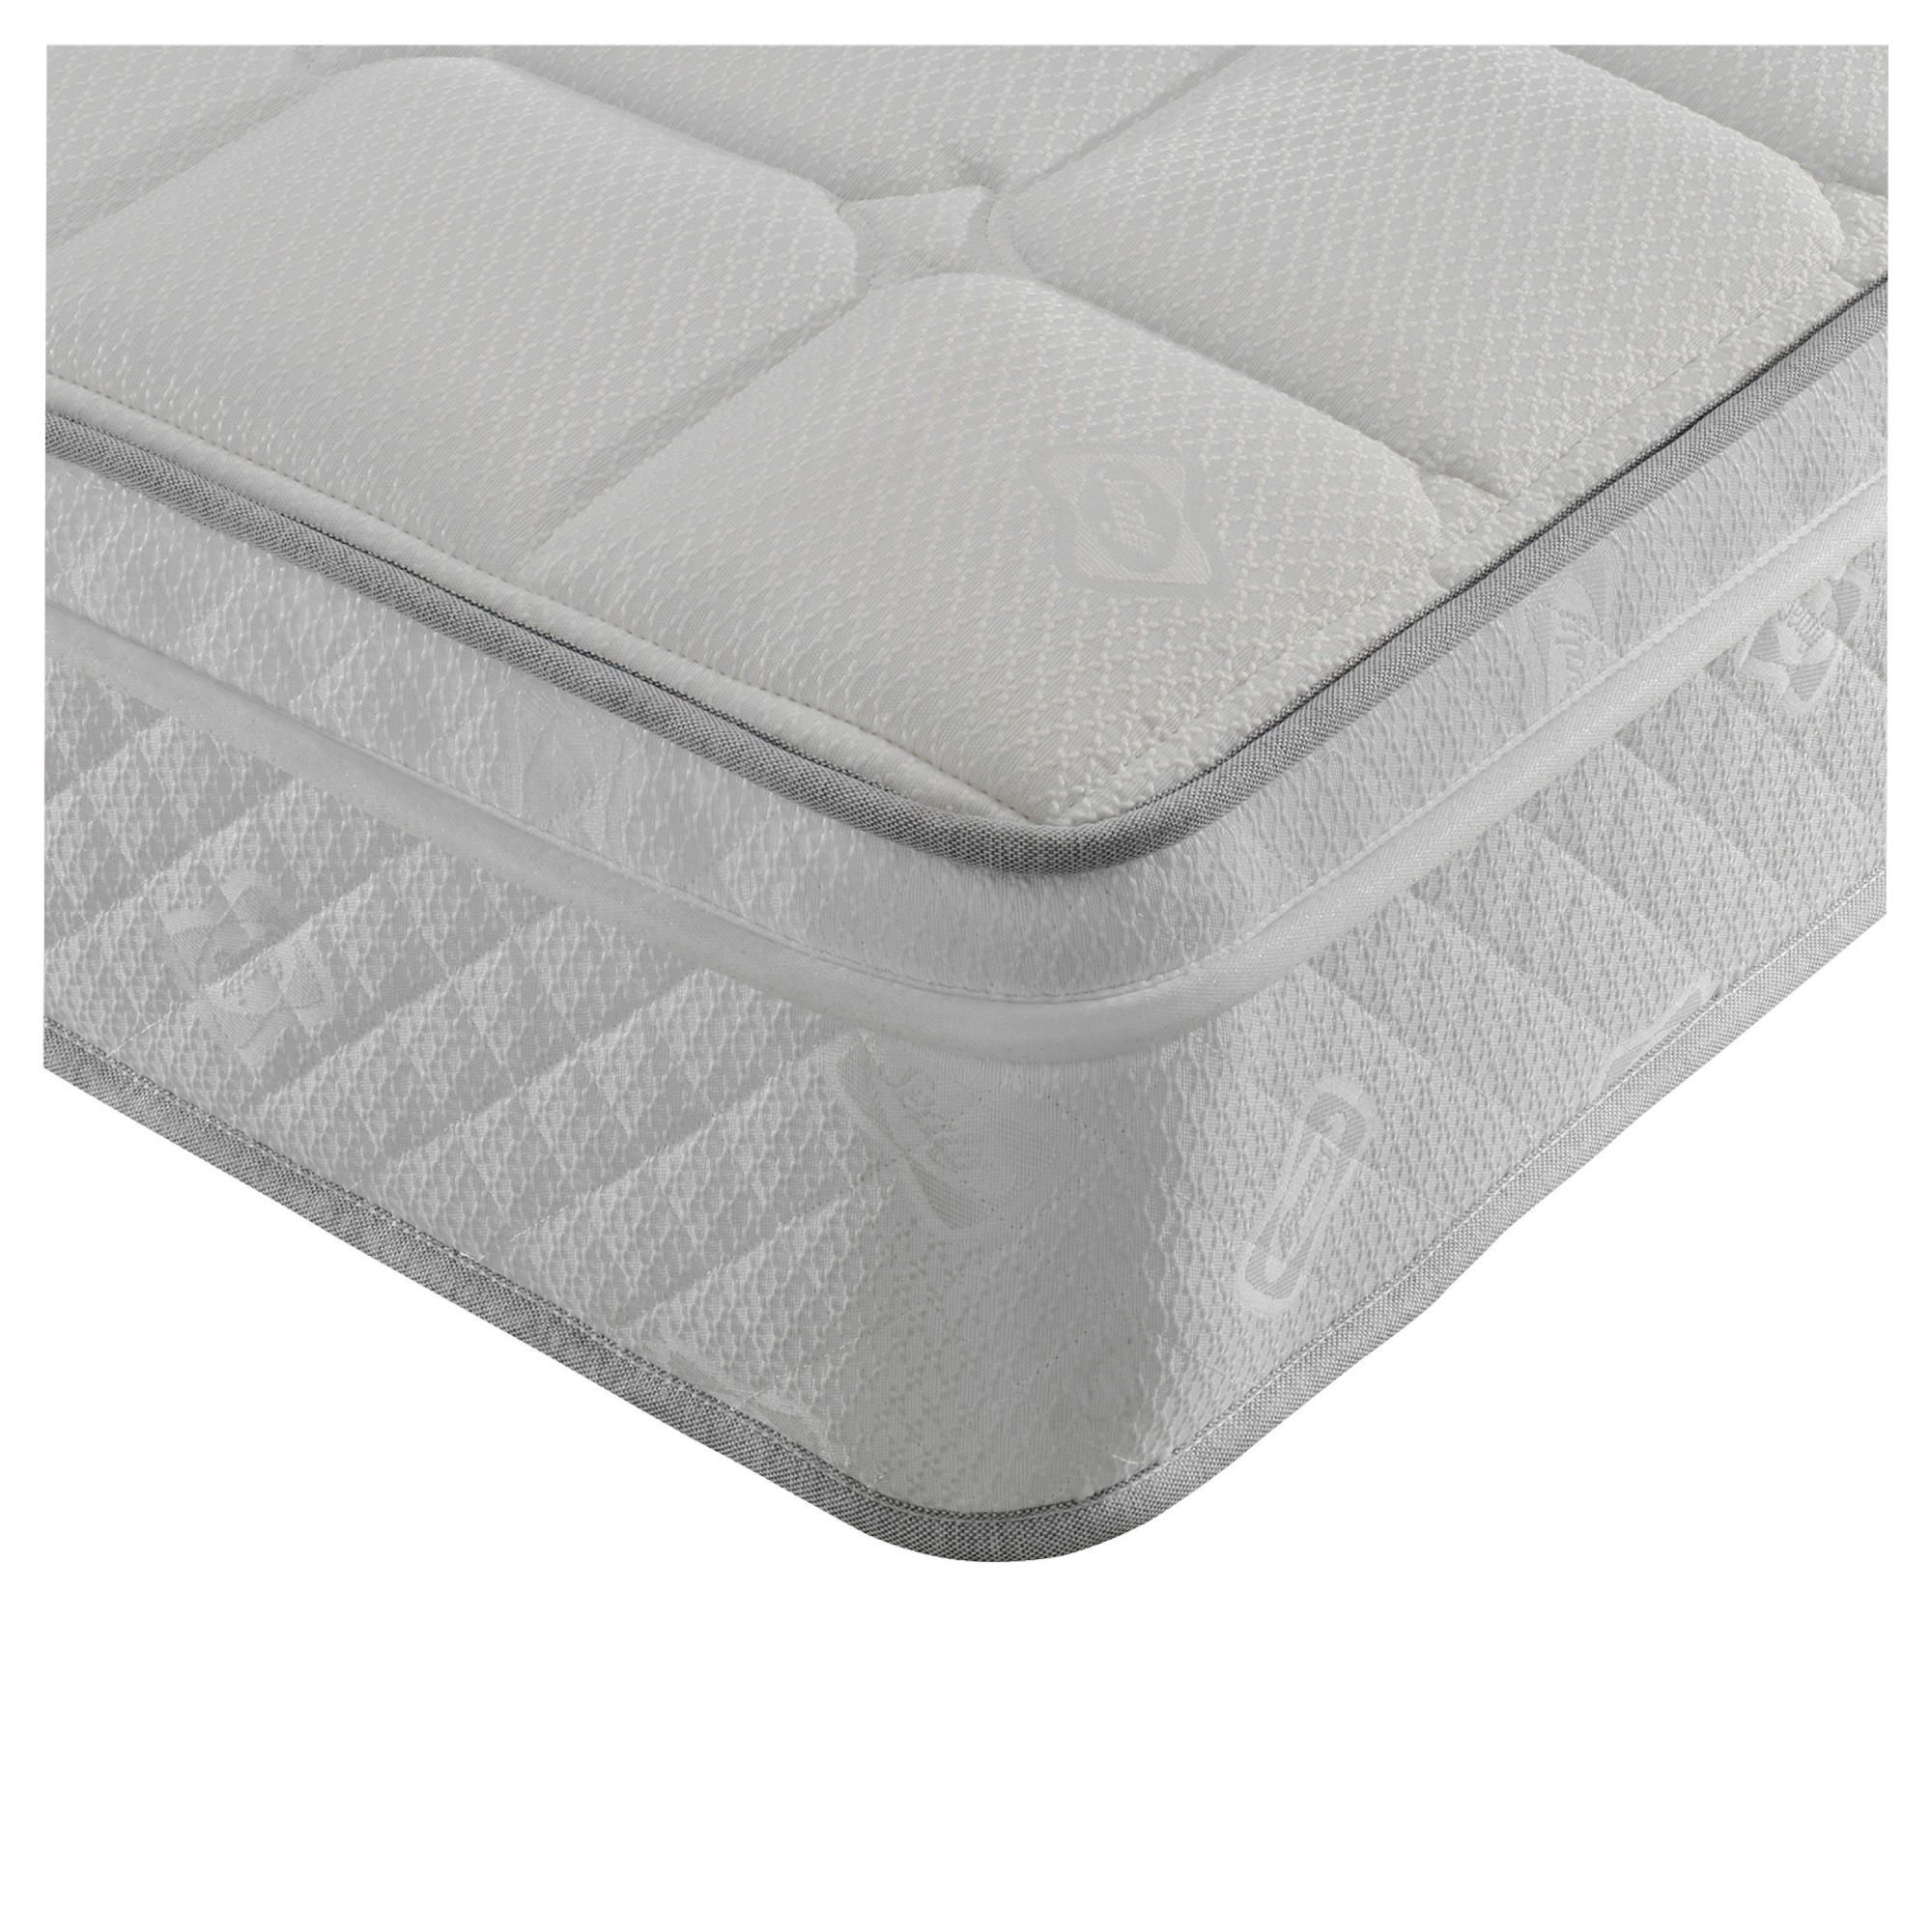 Sealy Purism Memory Zoned King Size Mattress (bedstead) at Tesco Direct